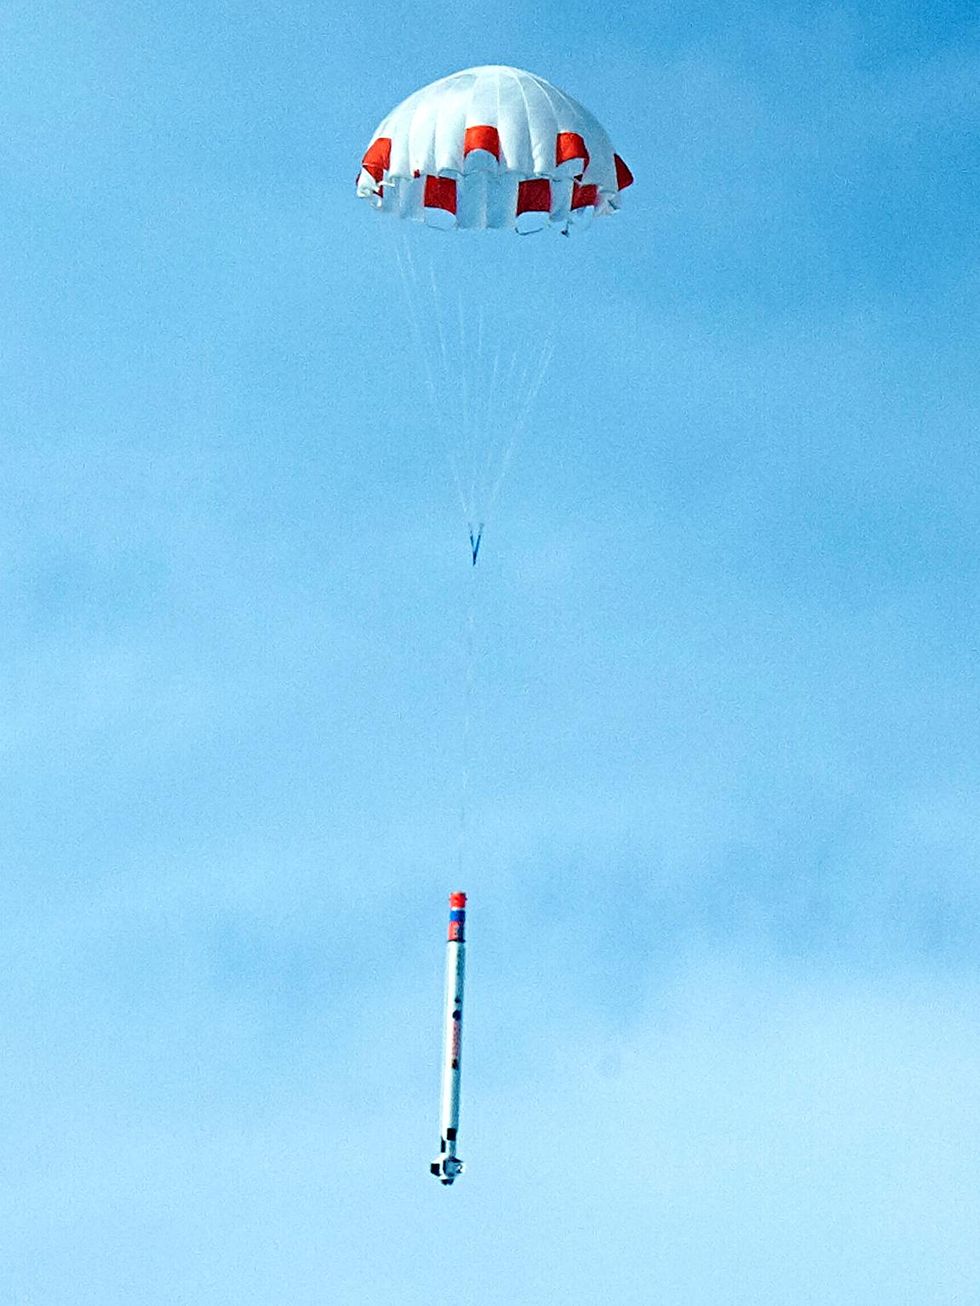 The right photo shows the rocket descending underneath a white-and-orange parachute.